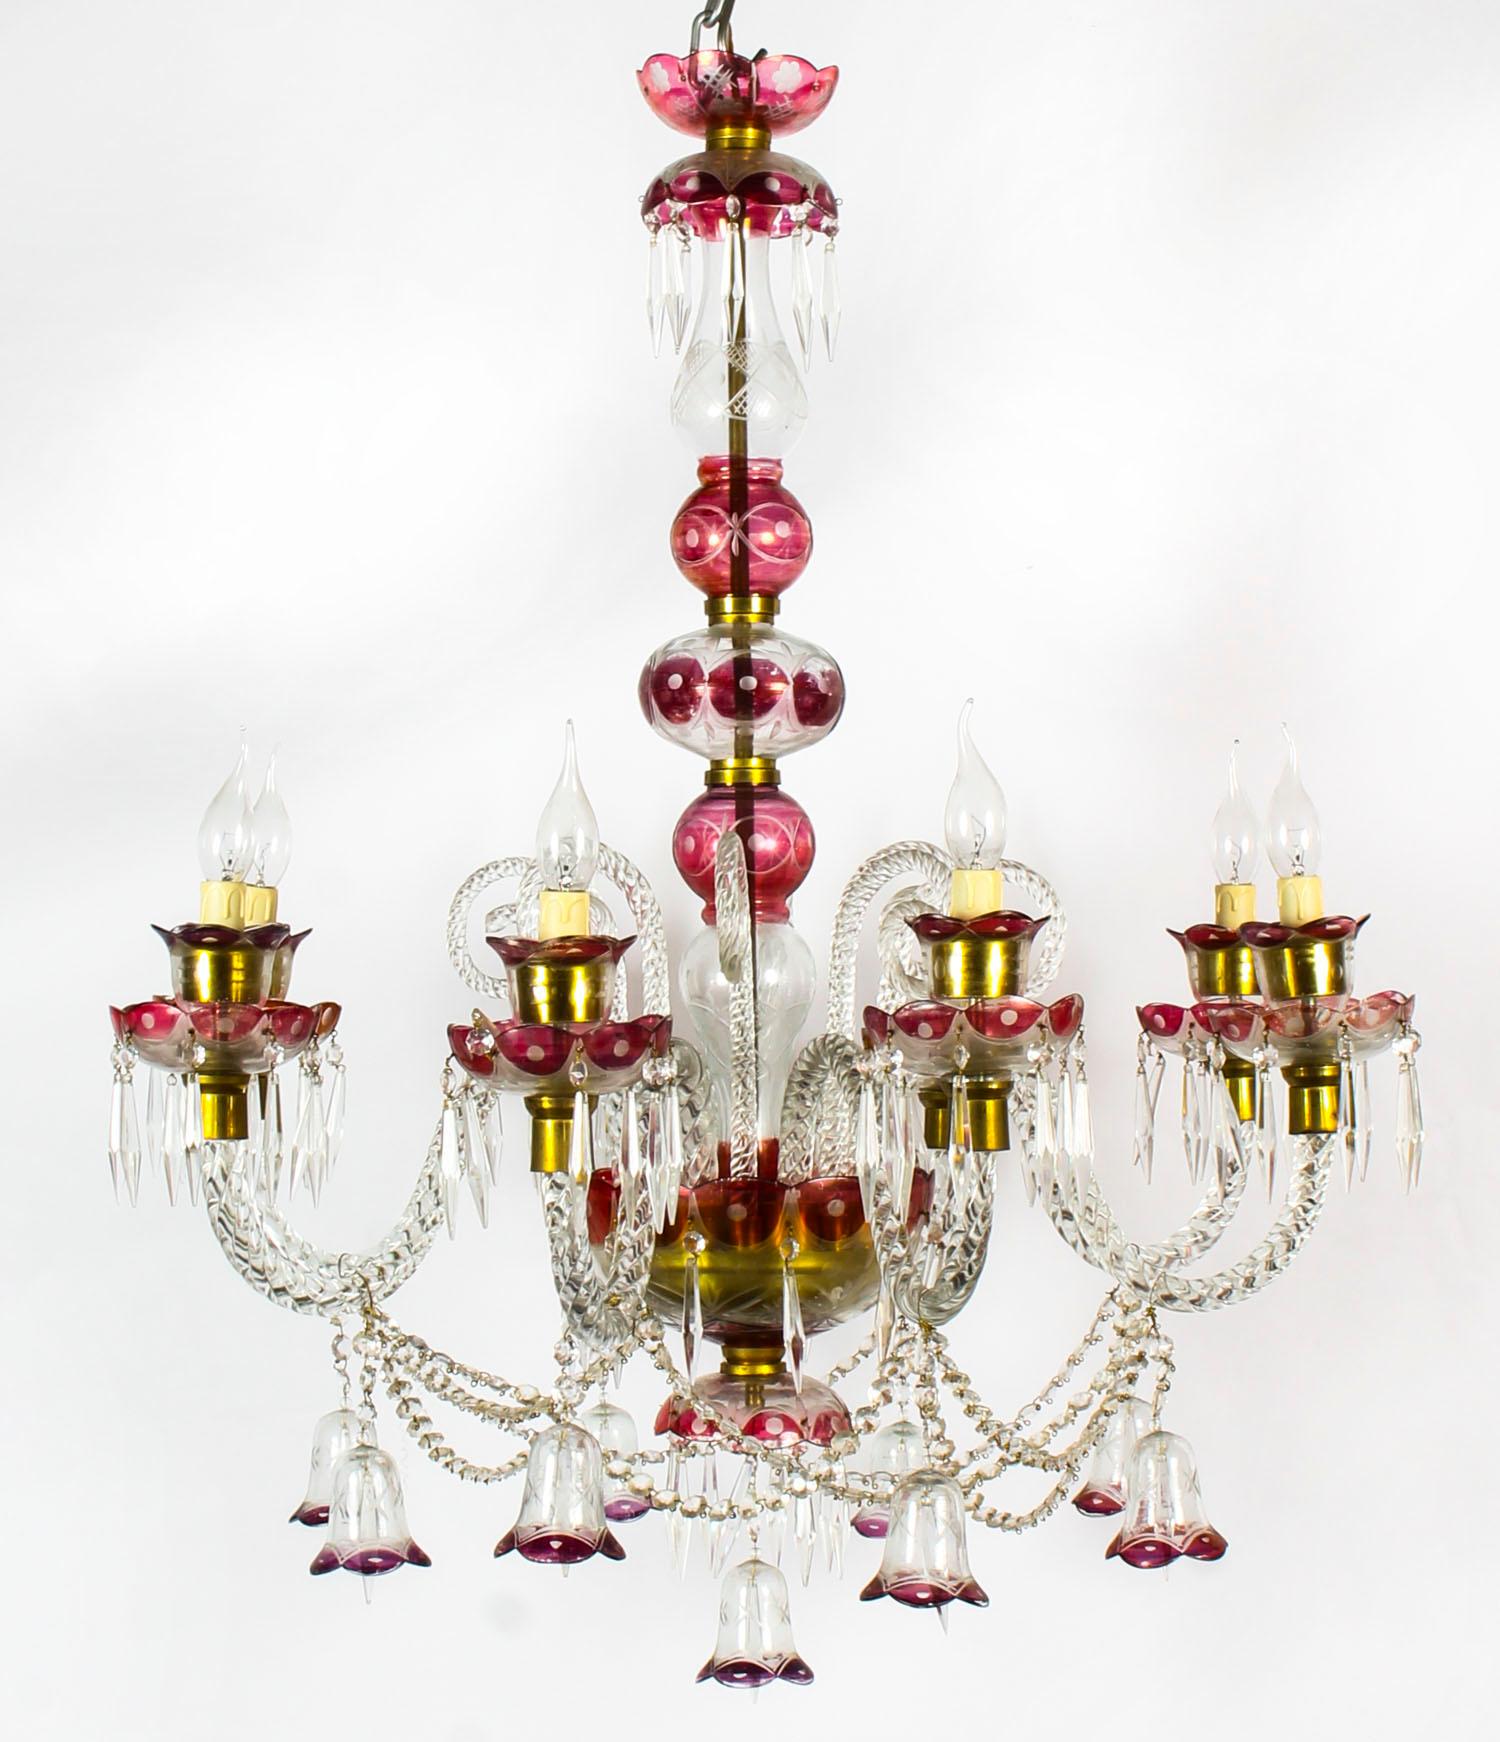 Italian Antique Venetian Eight Light Cranberry Crystal Chandelier, Early 20th Century